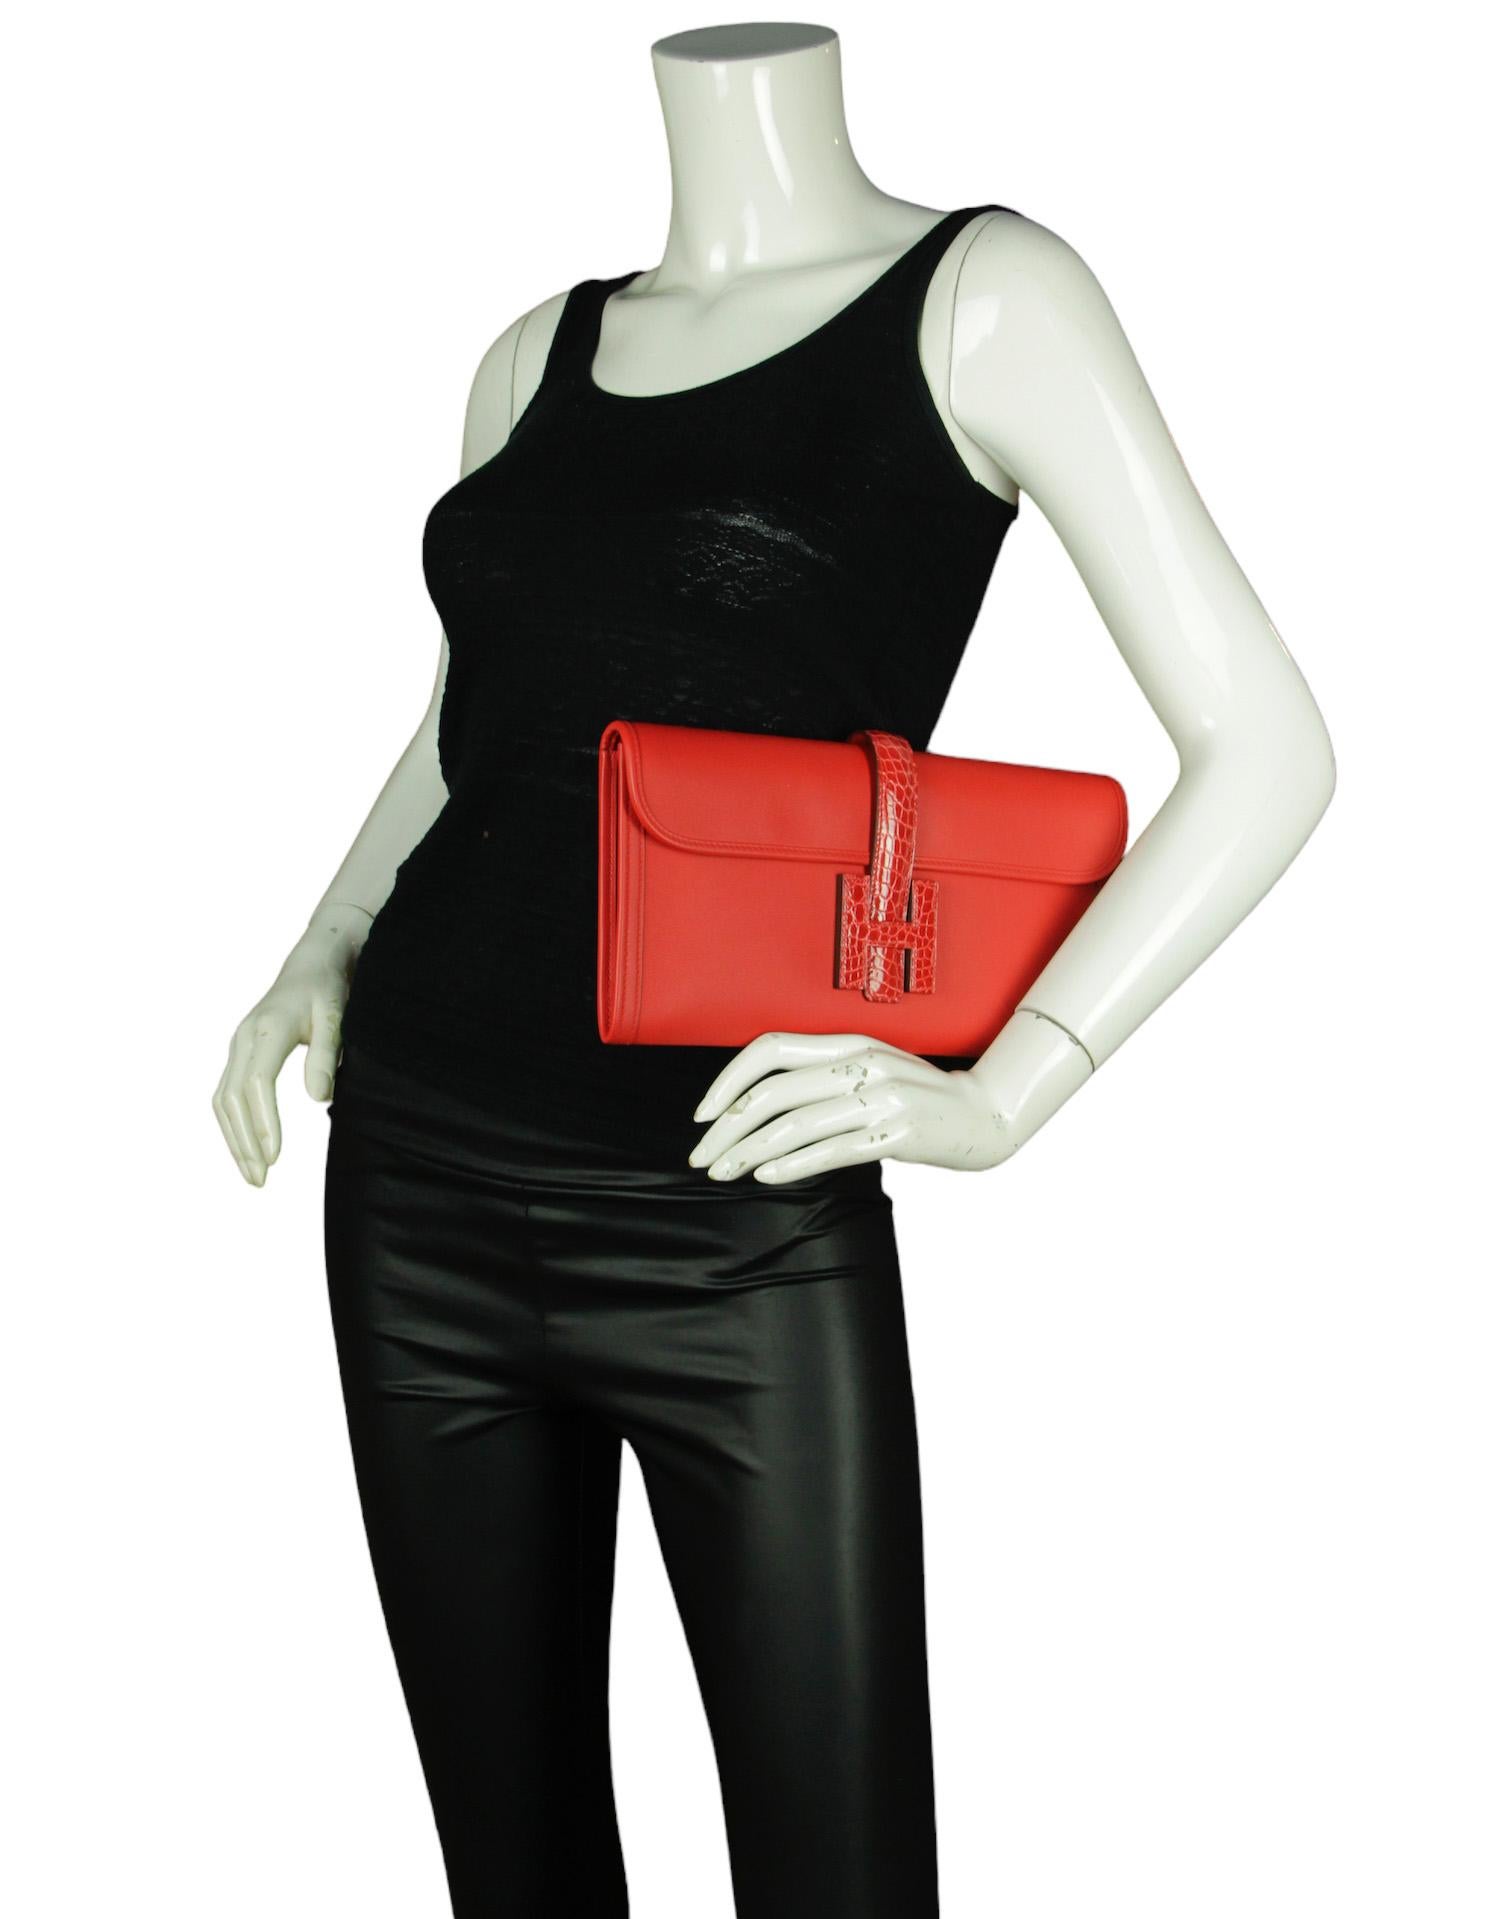 Hermes Rouge De Coeur Swift Leather & Alligator Jige Elan 29 Touch Clutch Bag

Made In: France
Year of Production: 2020
Color: Rouge de coeur red
Materials: Swift leather and Alligator Mississippiensis
Lining: Smooth leather
Closure/Opening: Flap